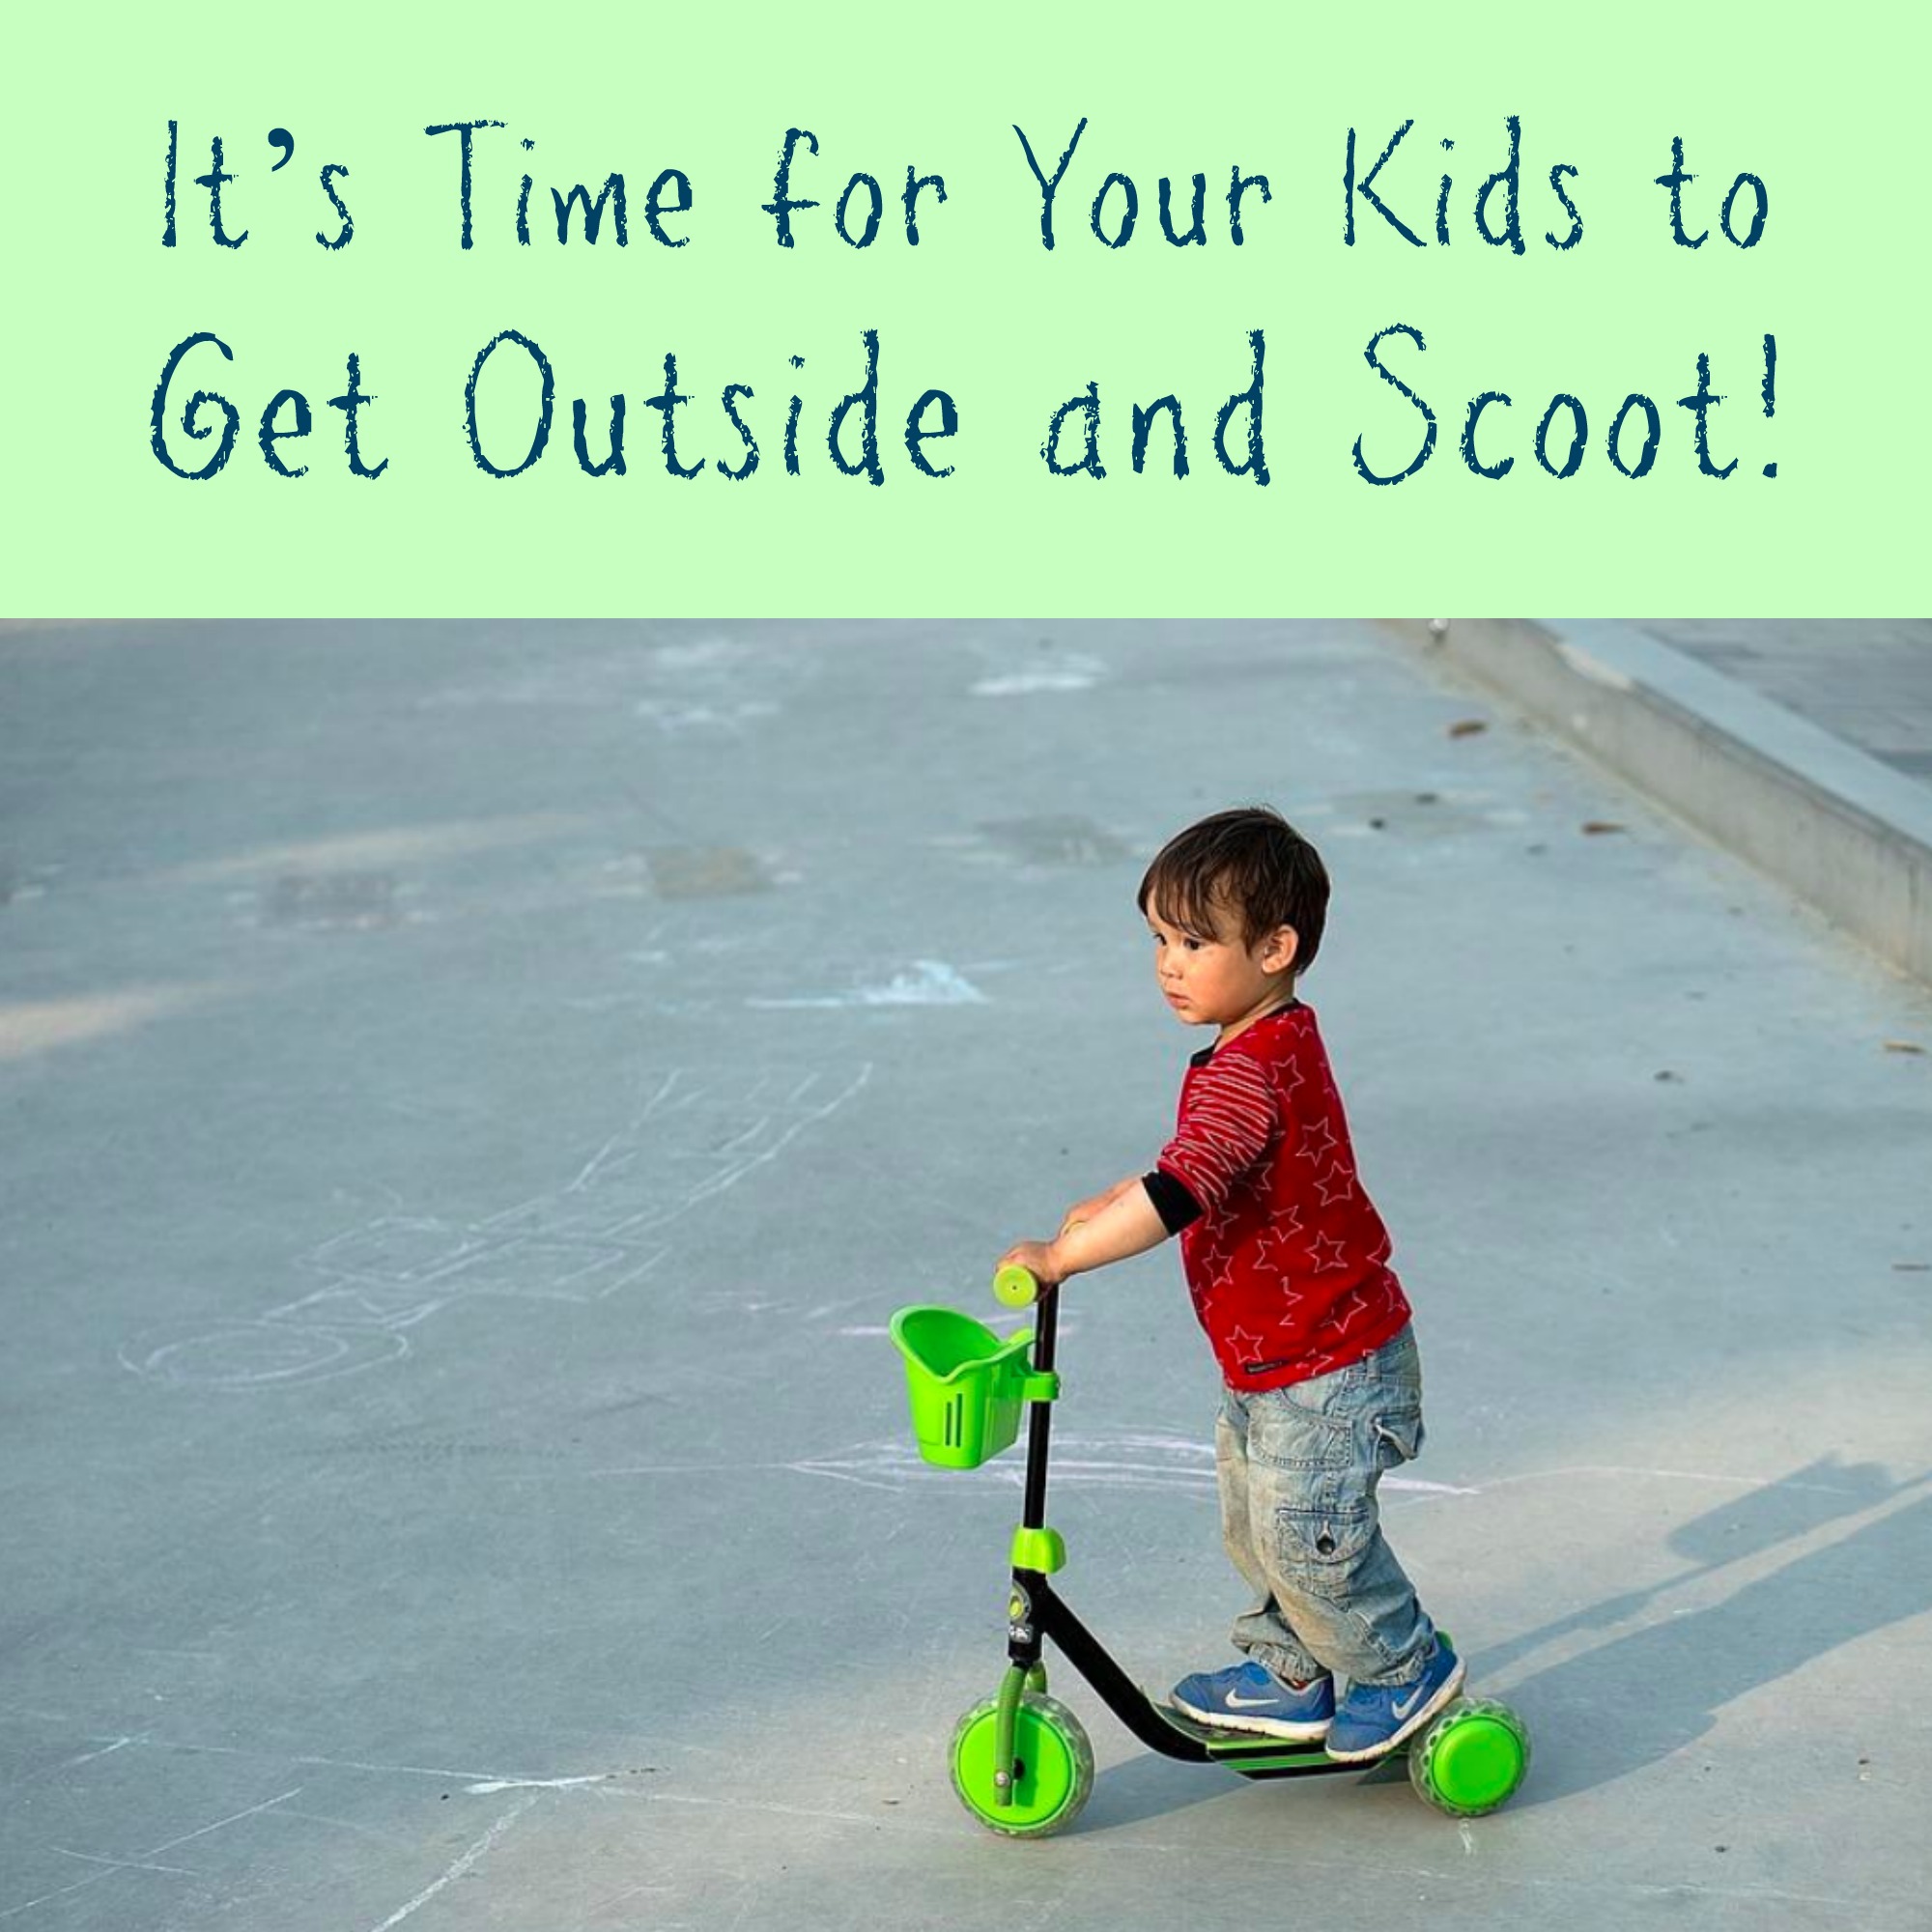 It’s Time for Your Kids to Get Outside and Scoot!